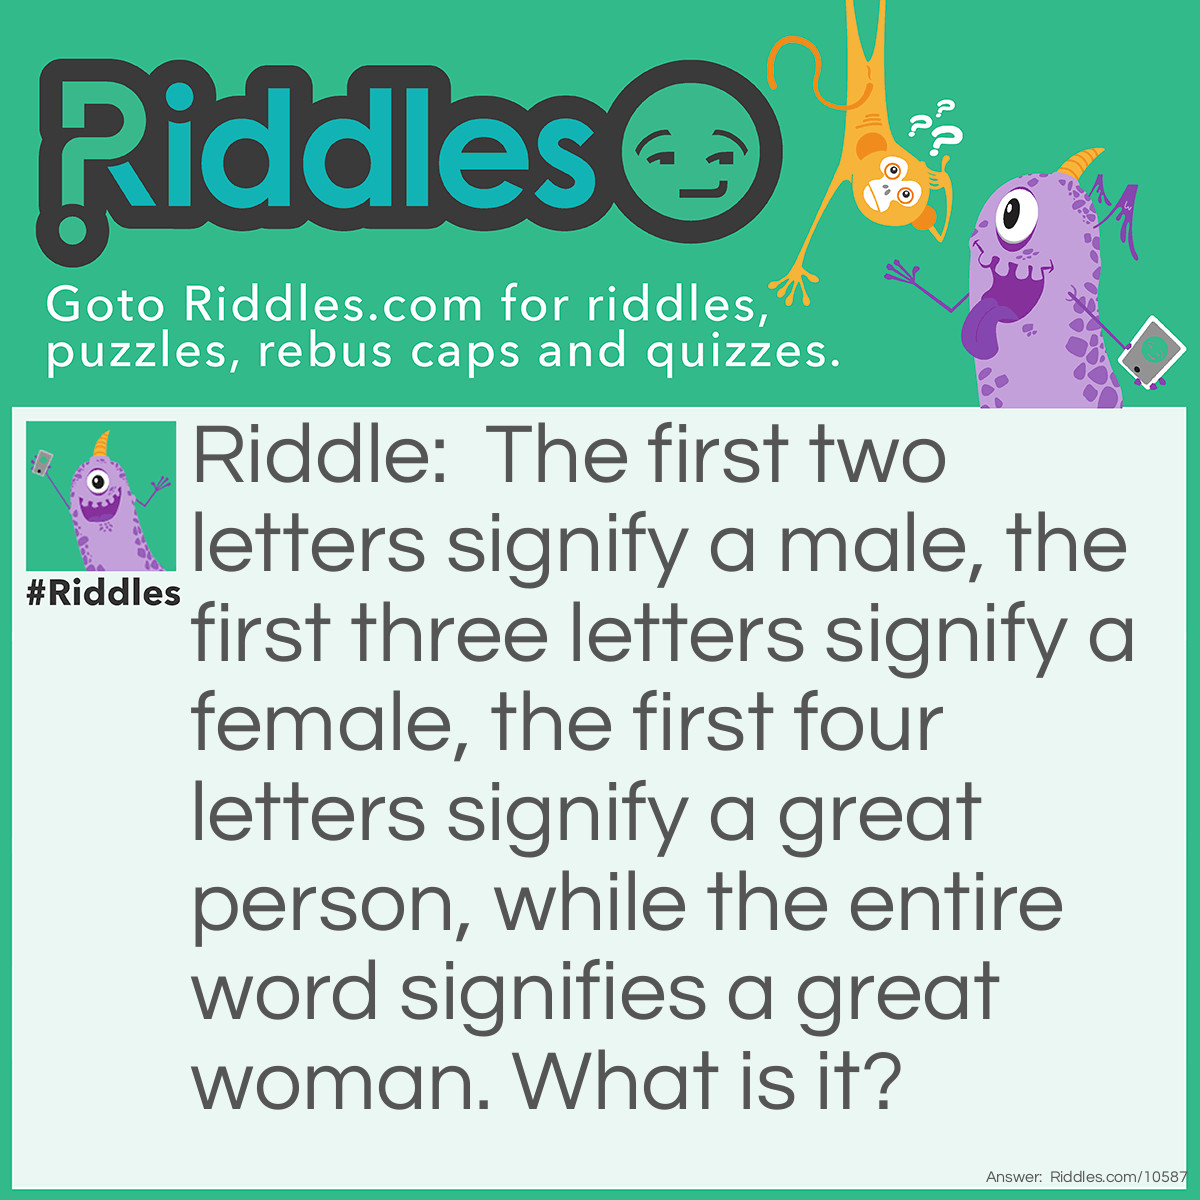 Riddle: The first two letters signify a male, the first three letters signify a female, the first four letters signify a great person, while the entire word signifies a great woman. What is it? Answer: Heroine.